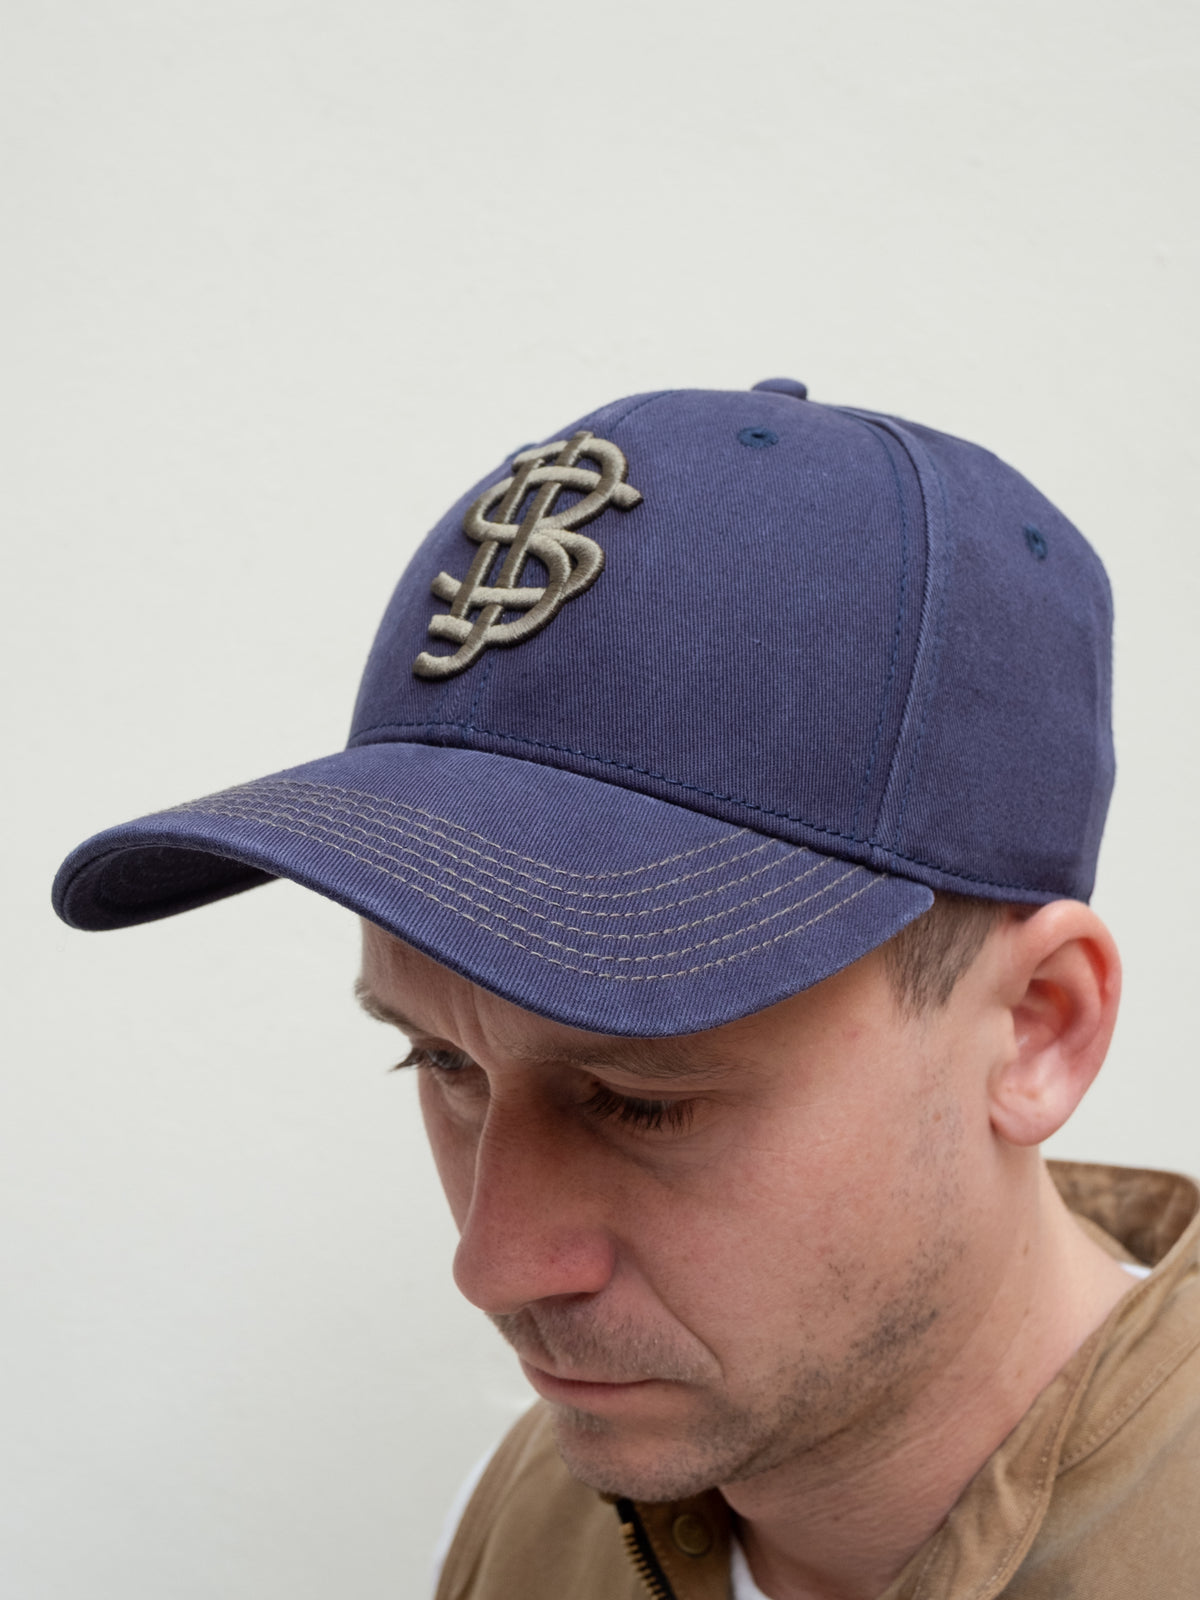 Stetson Stitched Logo Cap With UV Protection - Navy (7721125)